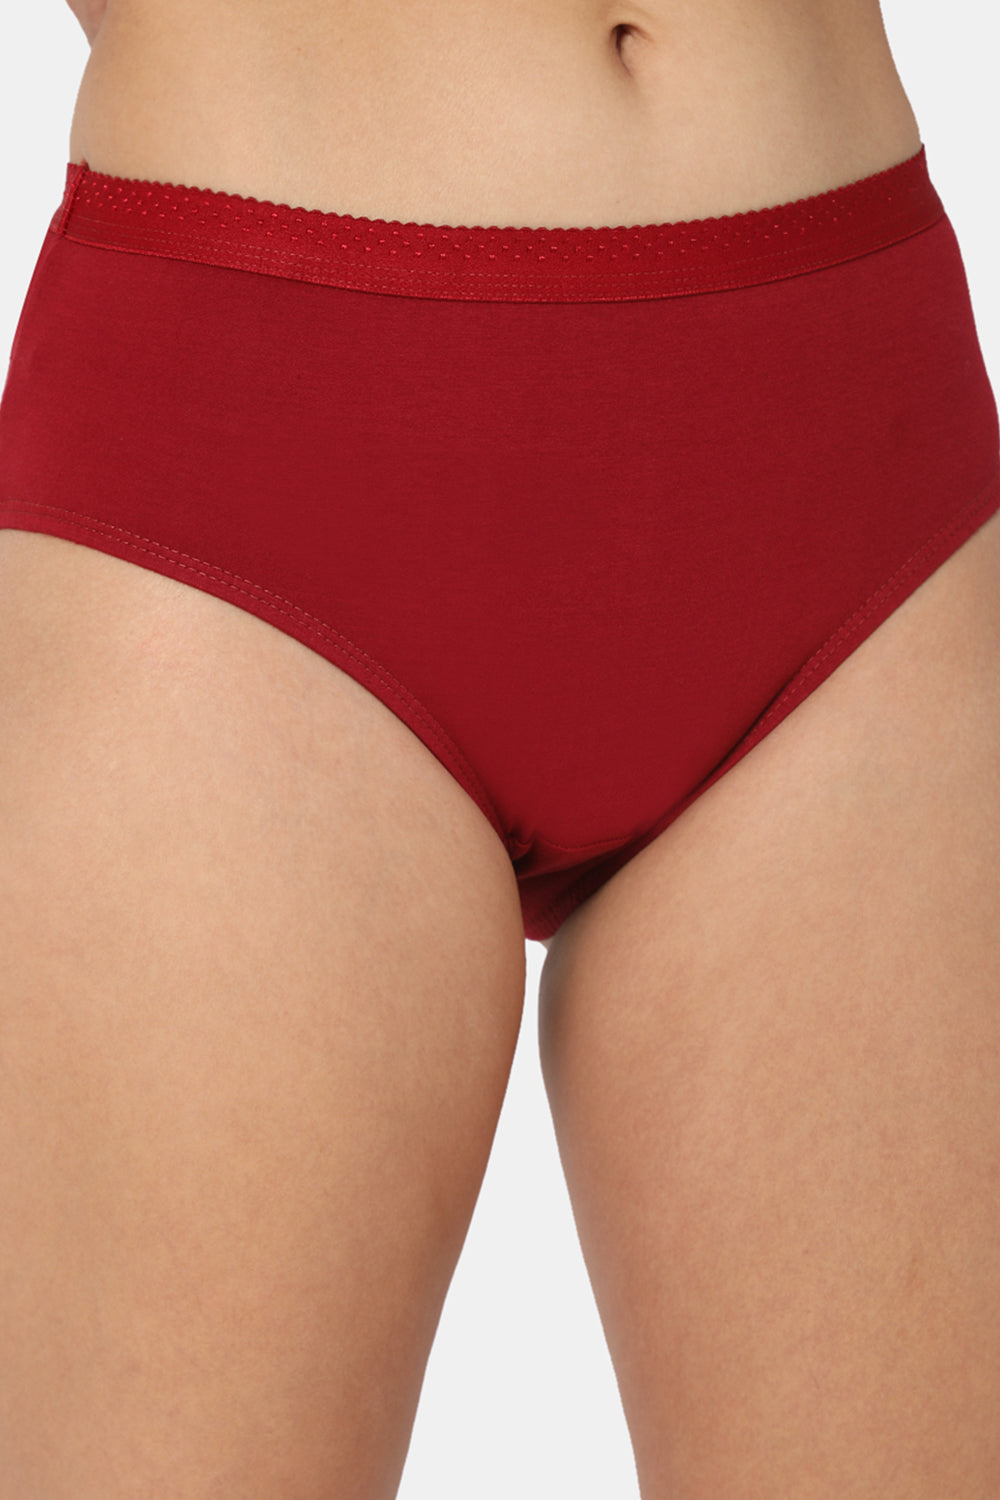 Intimacy Classic Dark Plain Panty - Outer Elastic -Pack of 3